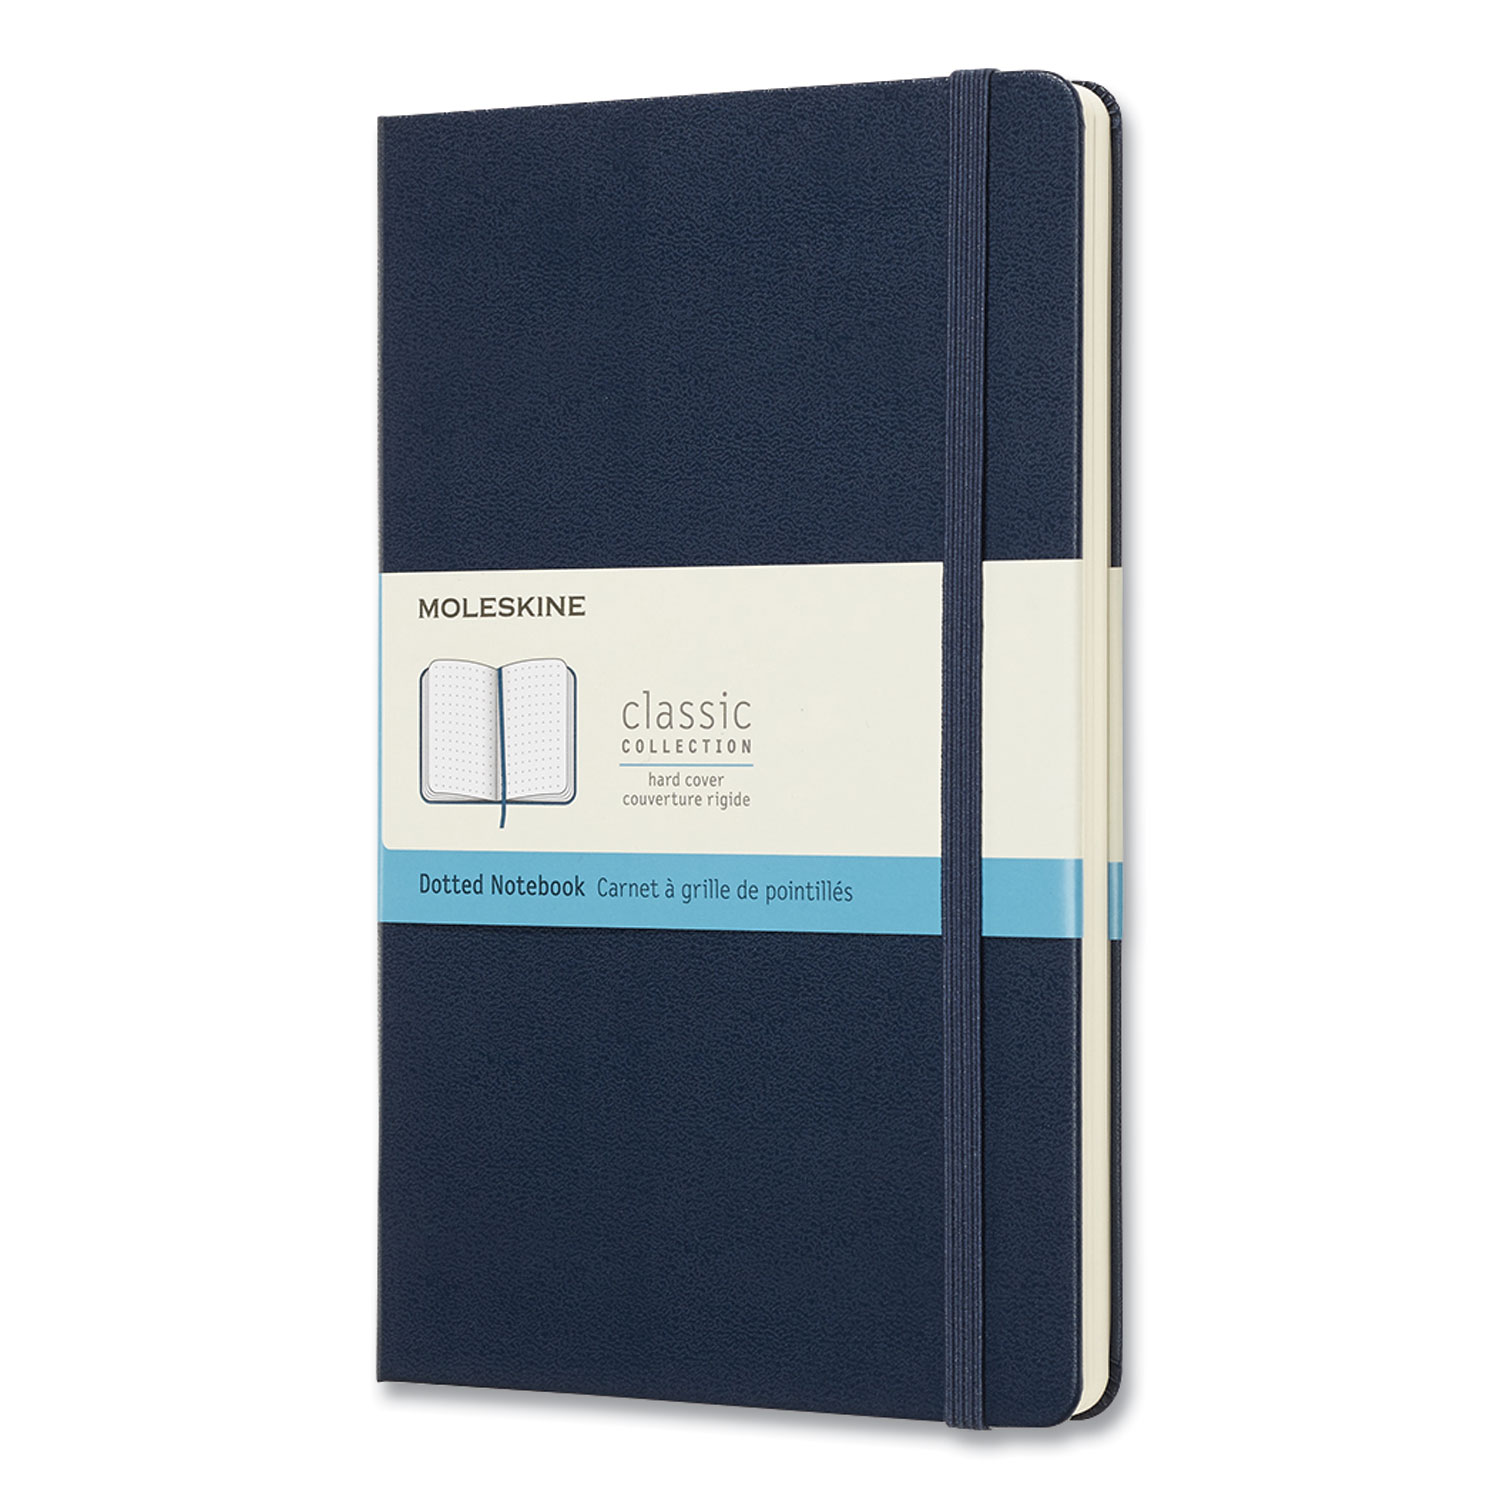  Moleskine 715437 Classic Collection Hard Cover Notebook, Dotted Ruled, Sapphire Blue Cover, 8.25 x 5 (HBG24359867) 